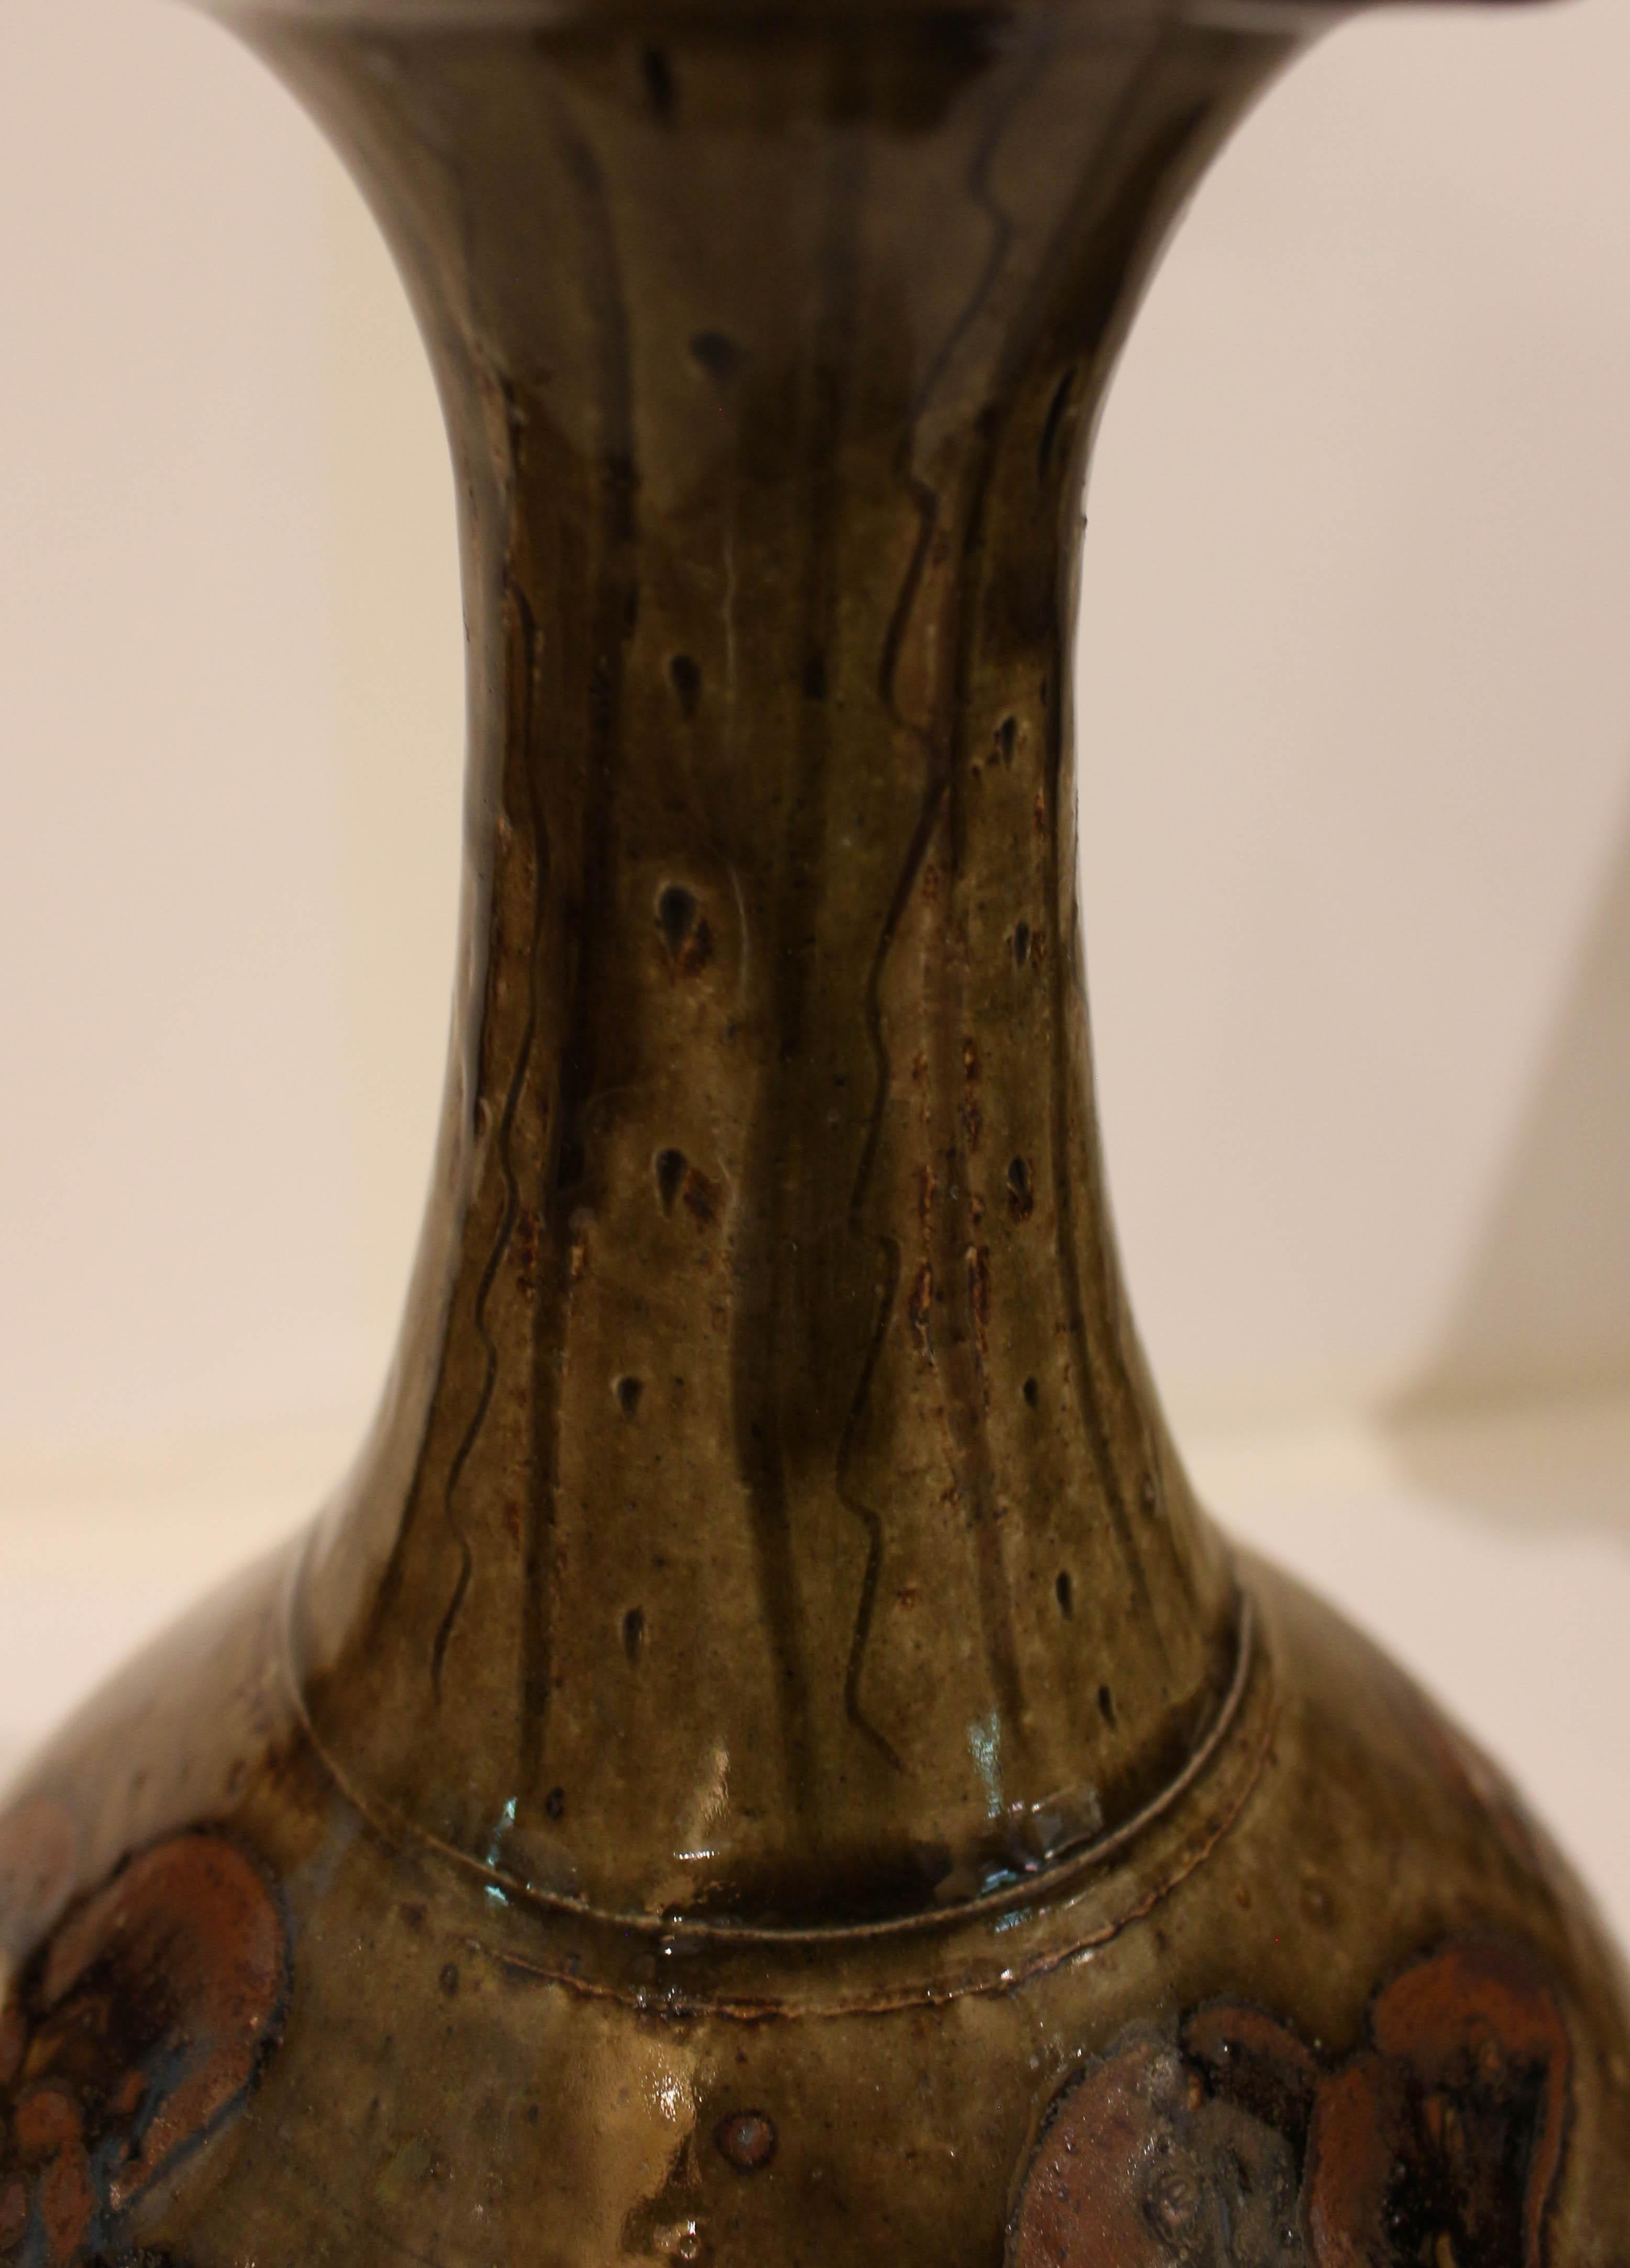 20th Century Post-1995 Long Neck Pottery Vase by Mark Hewitt For Sale